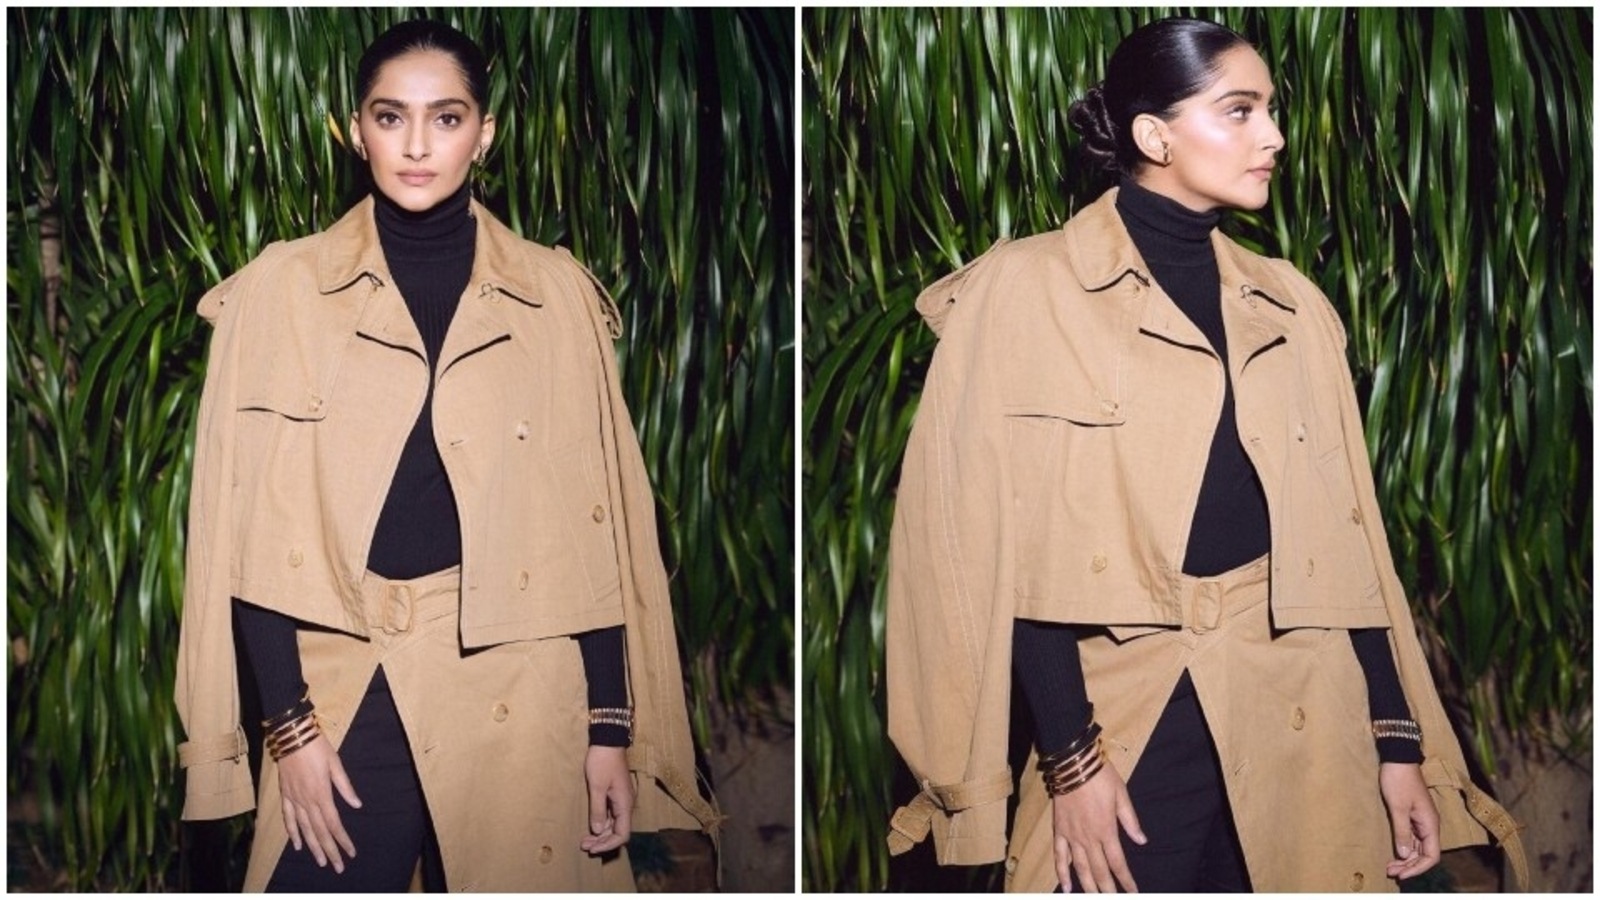 ‘OG Fashion Queen’ Sonam Kapoor shows a new way to wear skirts for winters at event with Anand Ahuja: See pics, videos